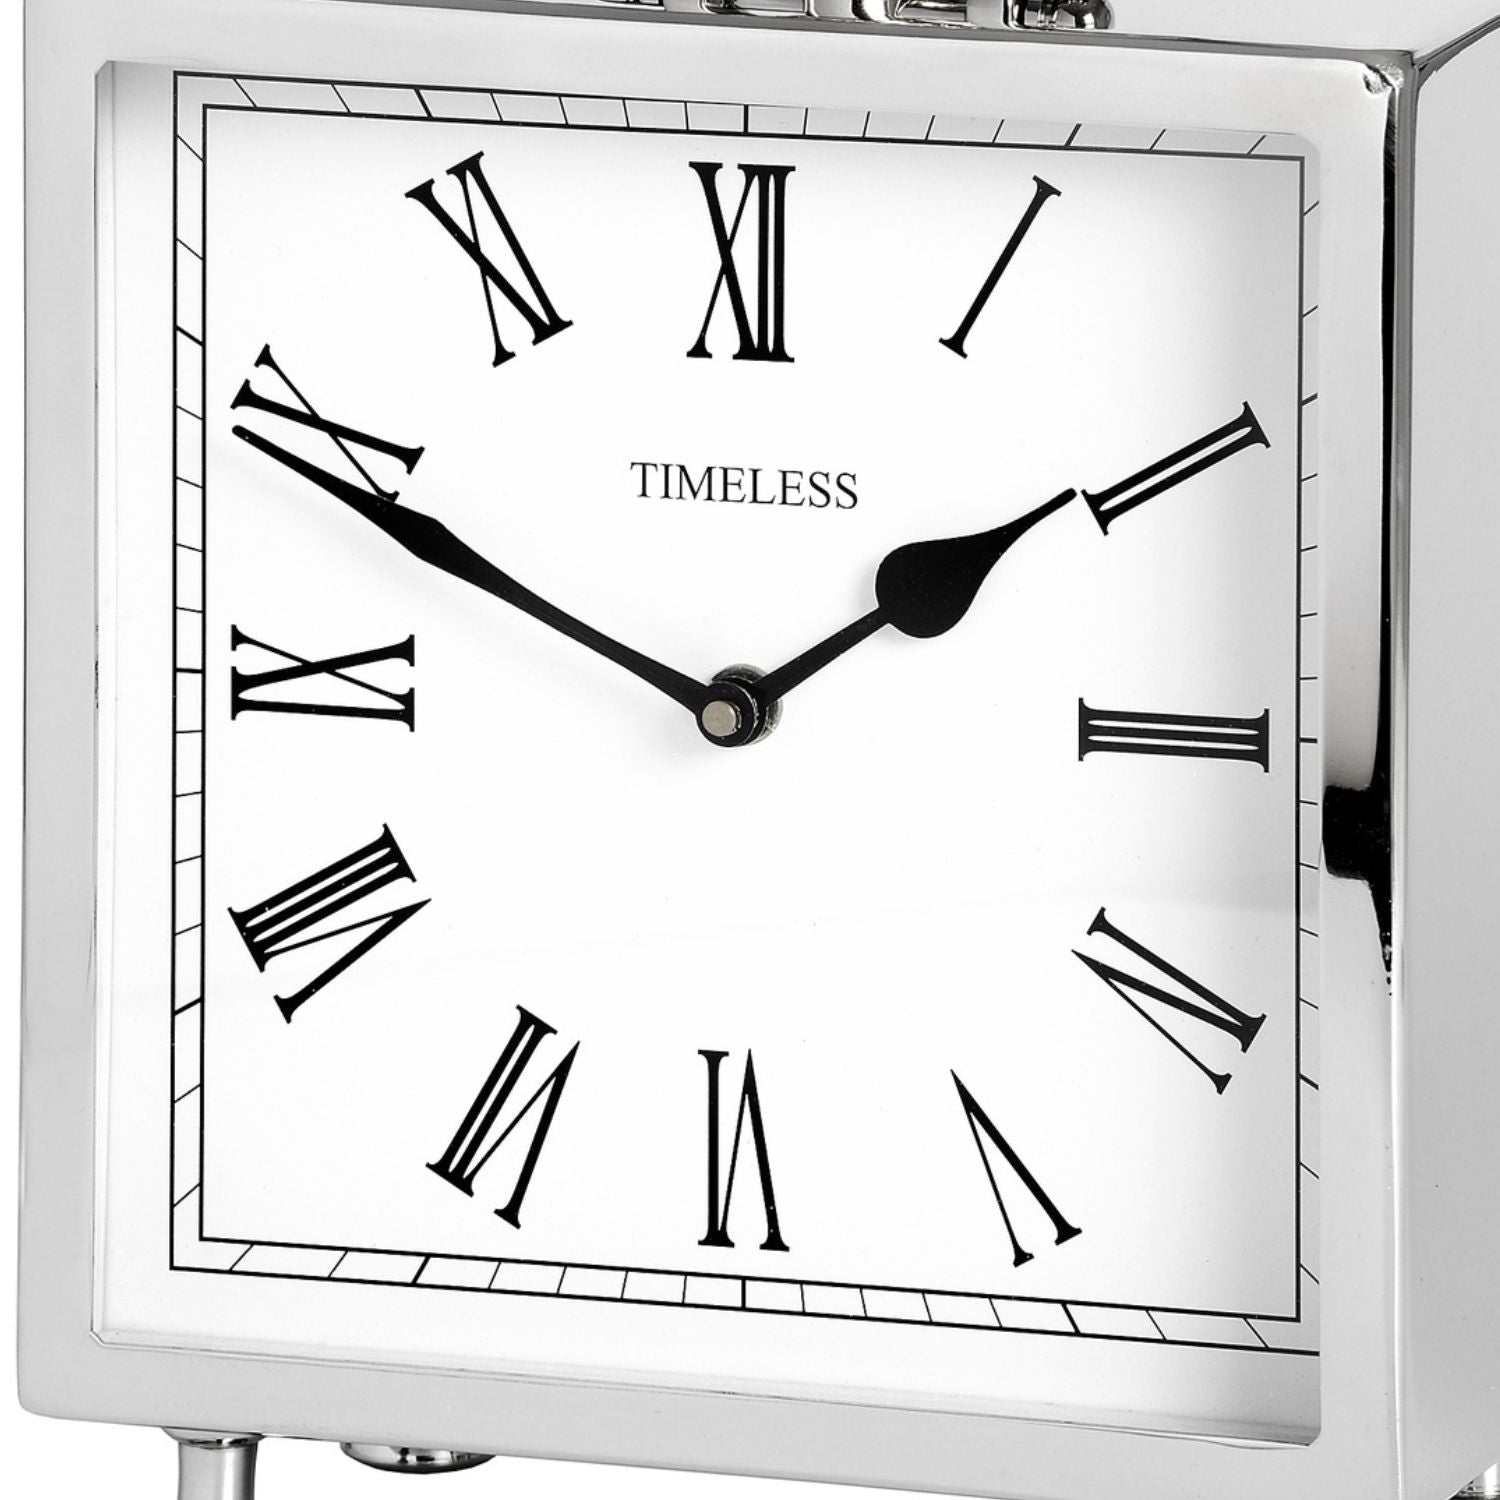 Square silver mantel clock and timepiece